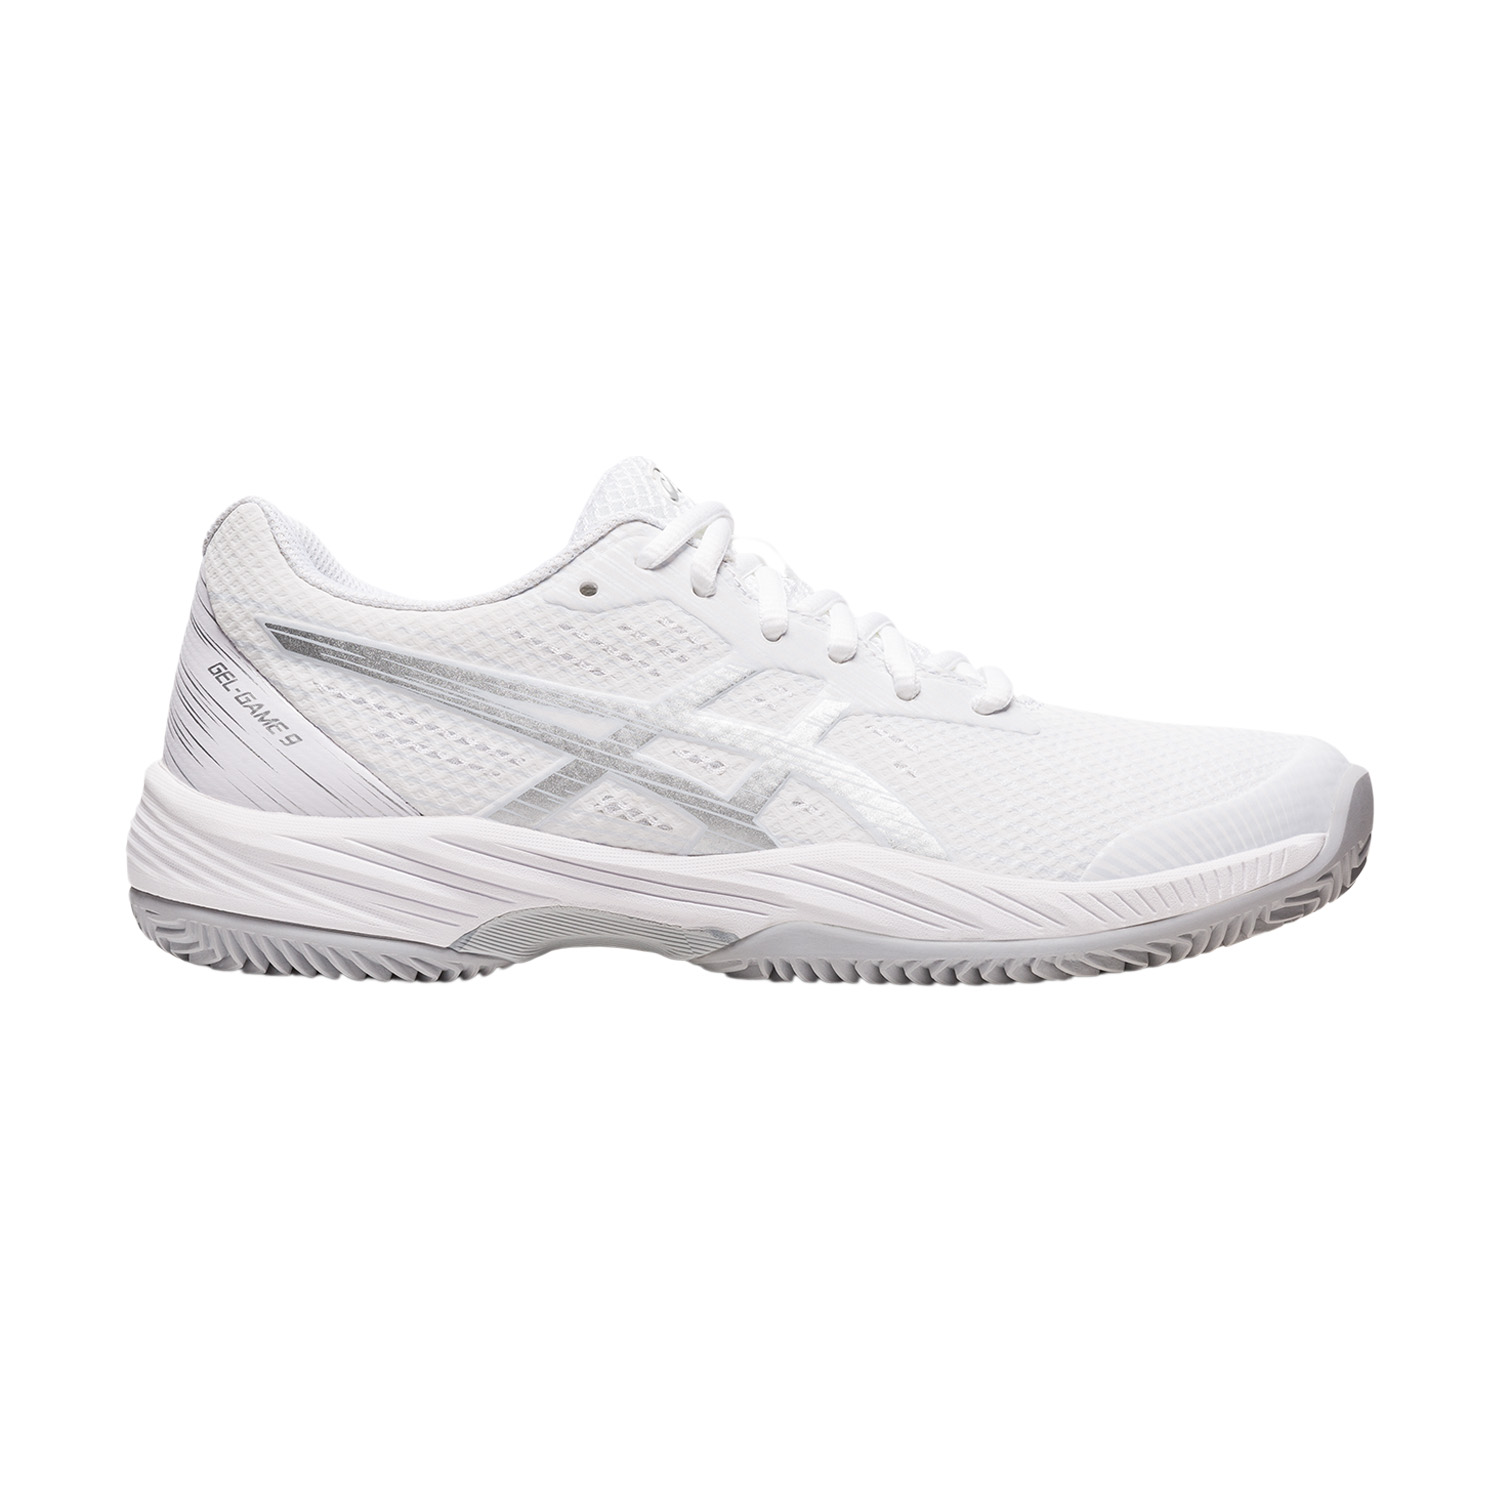 Asics Gel Game 9 Clay/OC Women's Tennis Shoes - White/Pure Silver